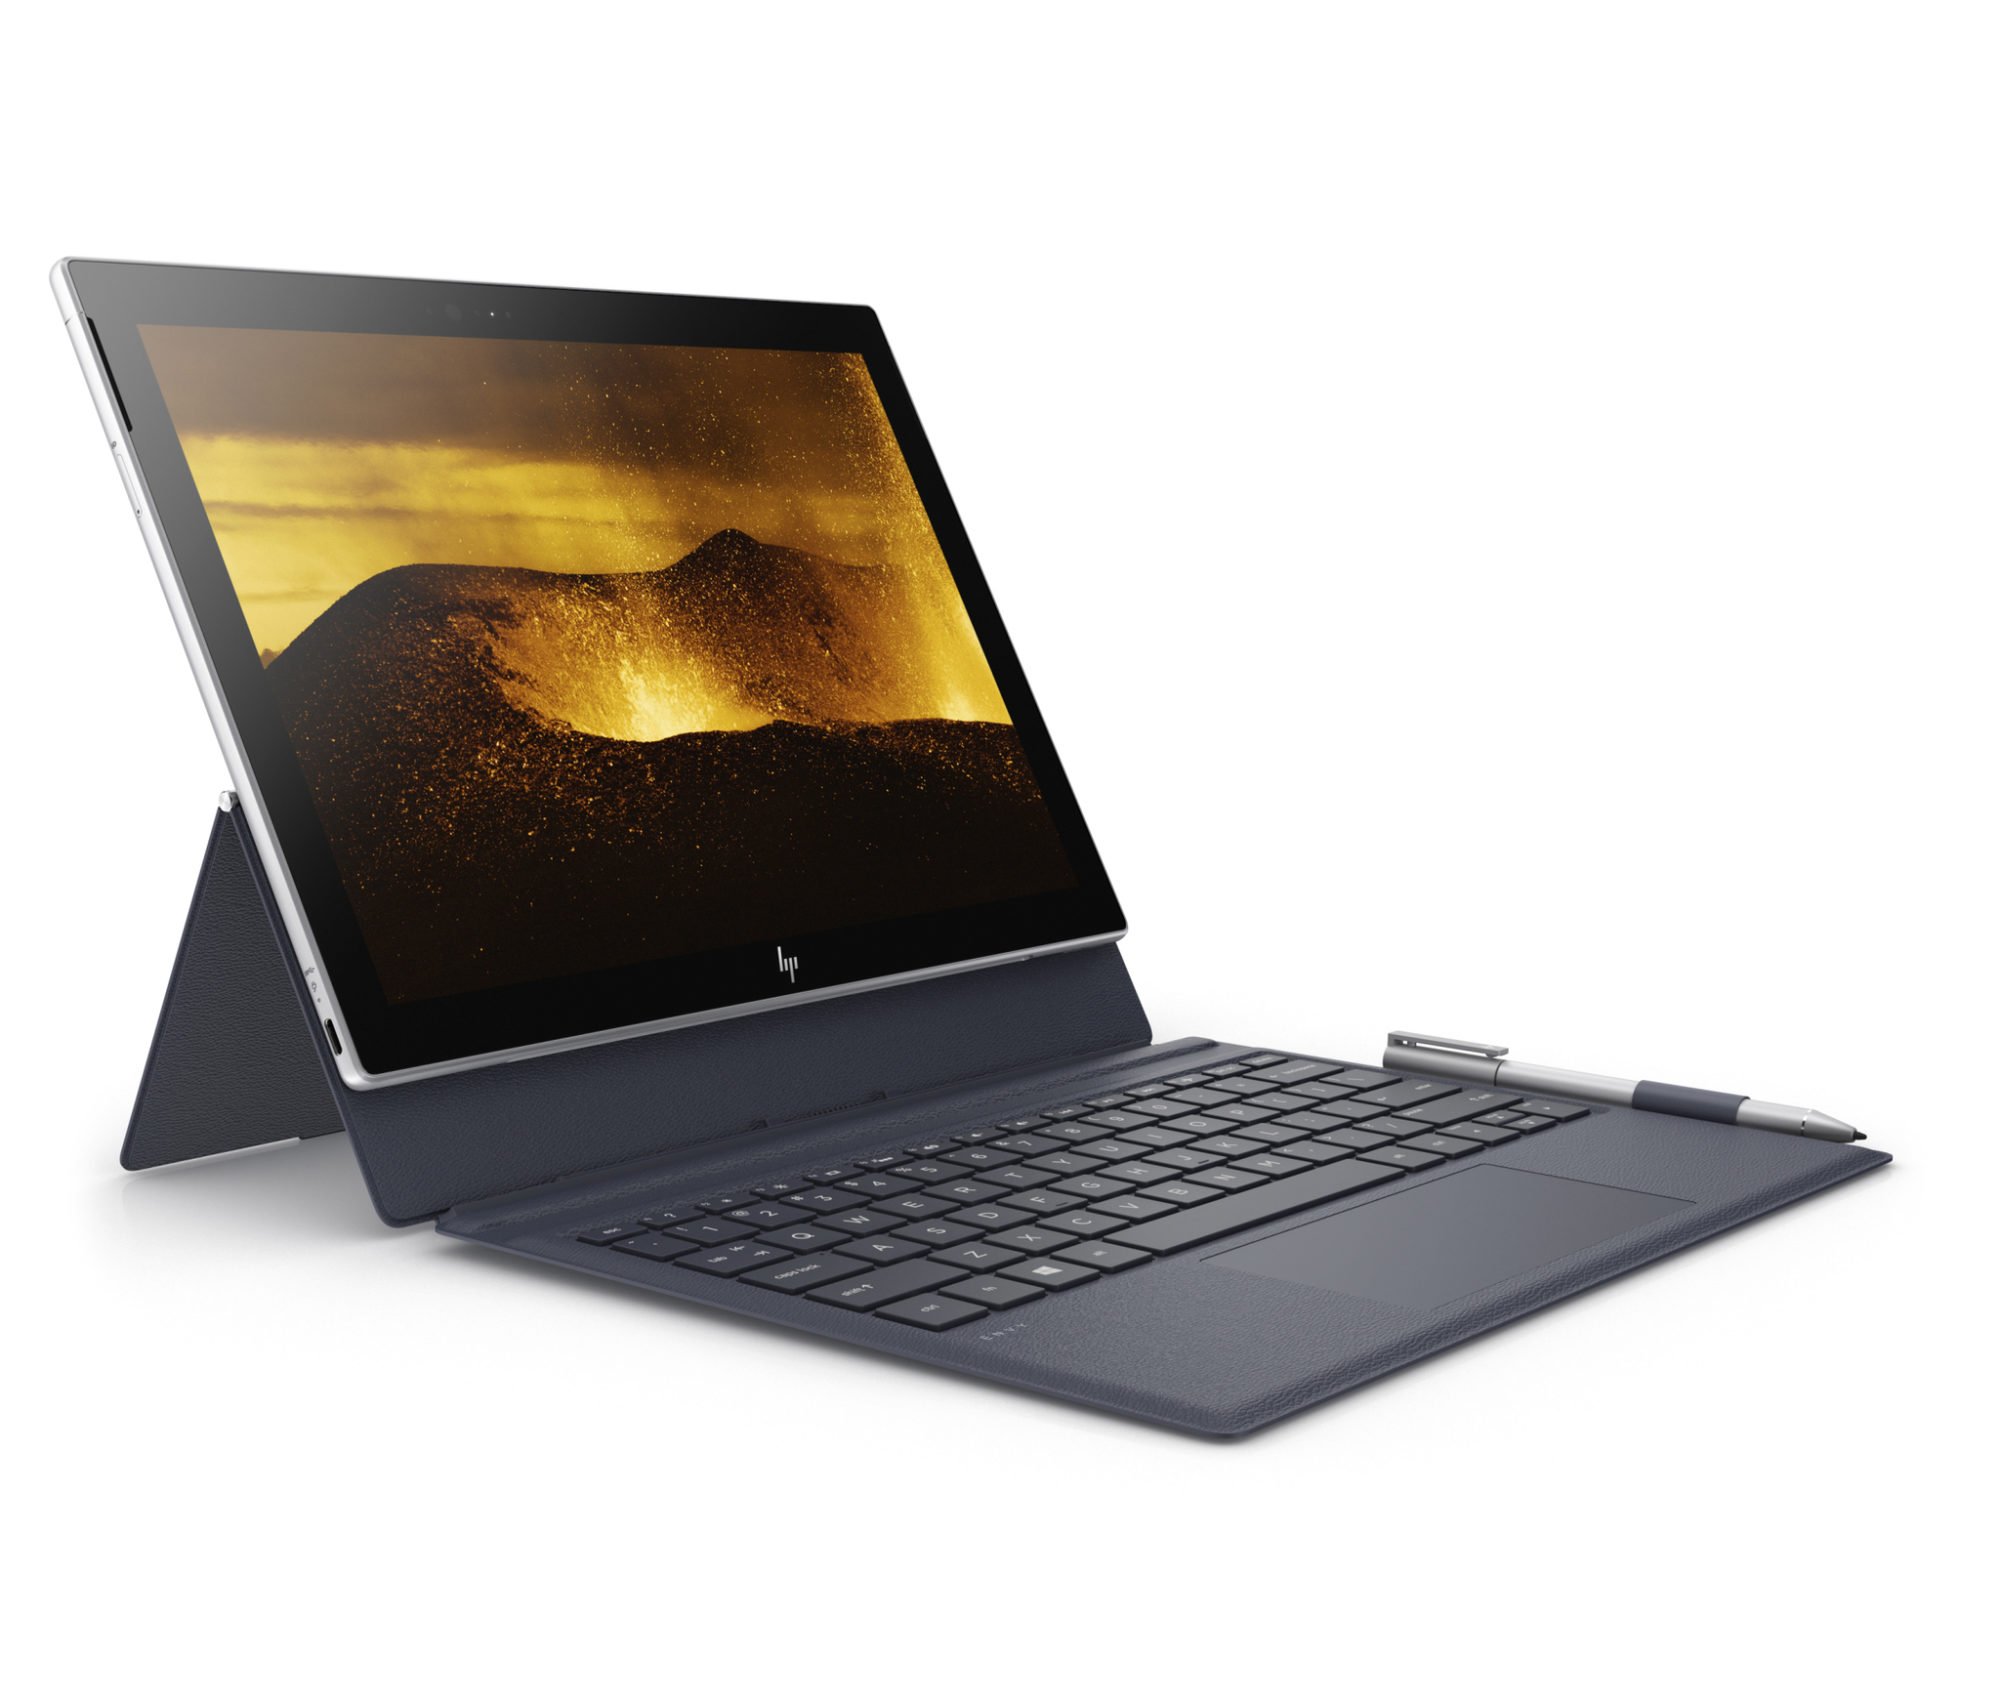 HP’s Envy x2, 20 Hours Battery Life Powered by Snapdragon 835